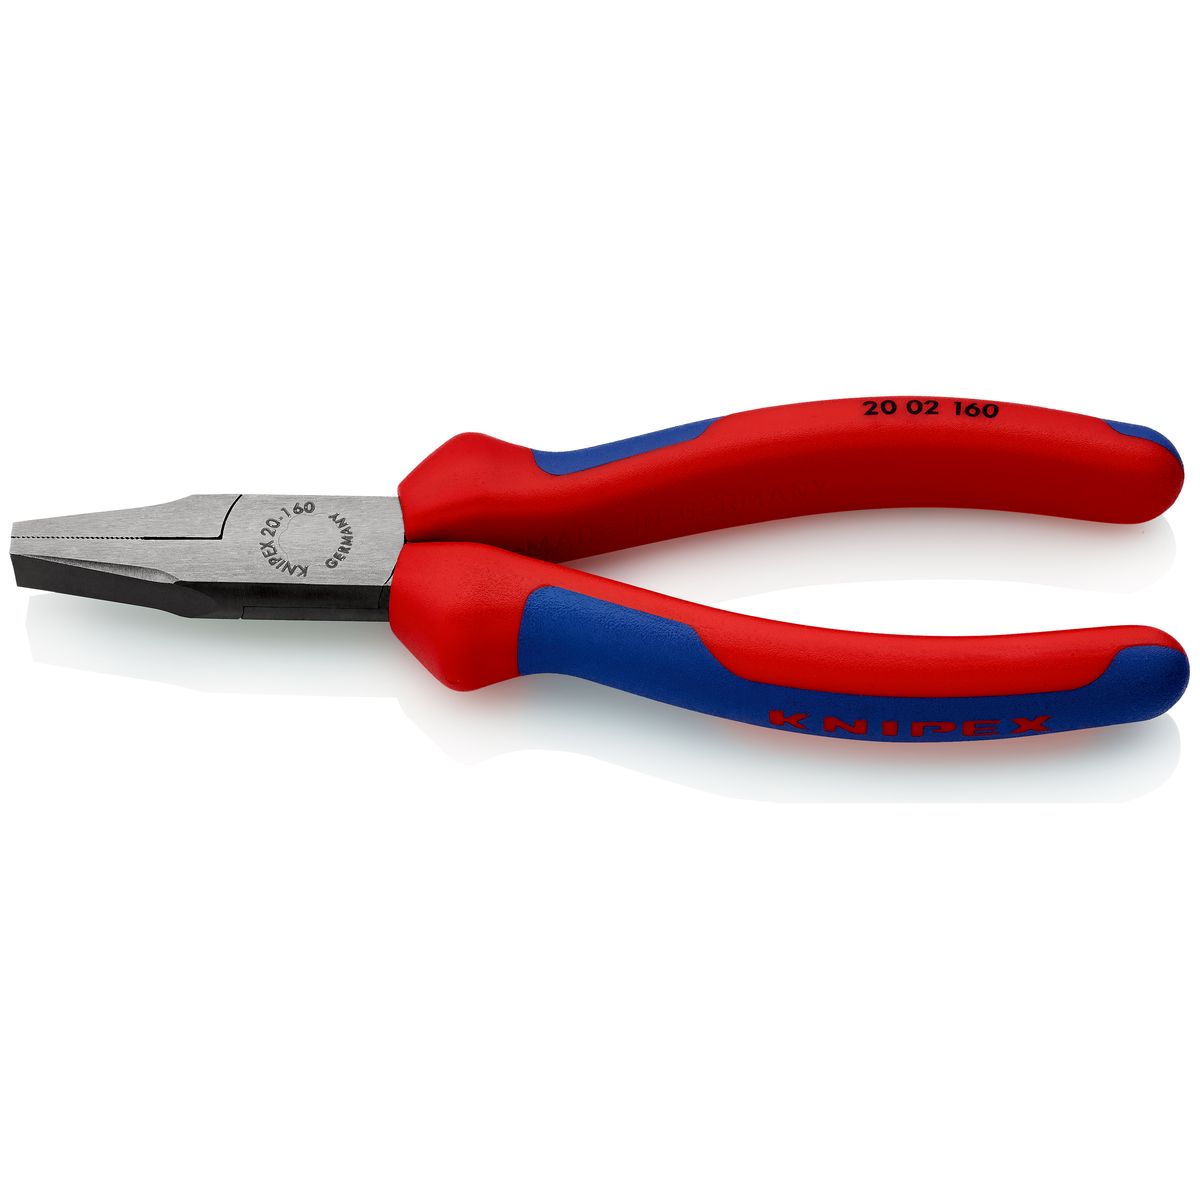 FLAT NOSE PLIERS 2002 160mm Knipex